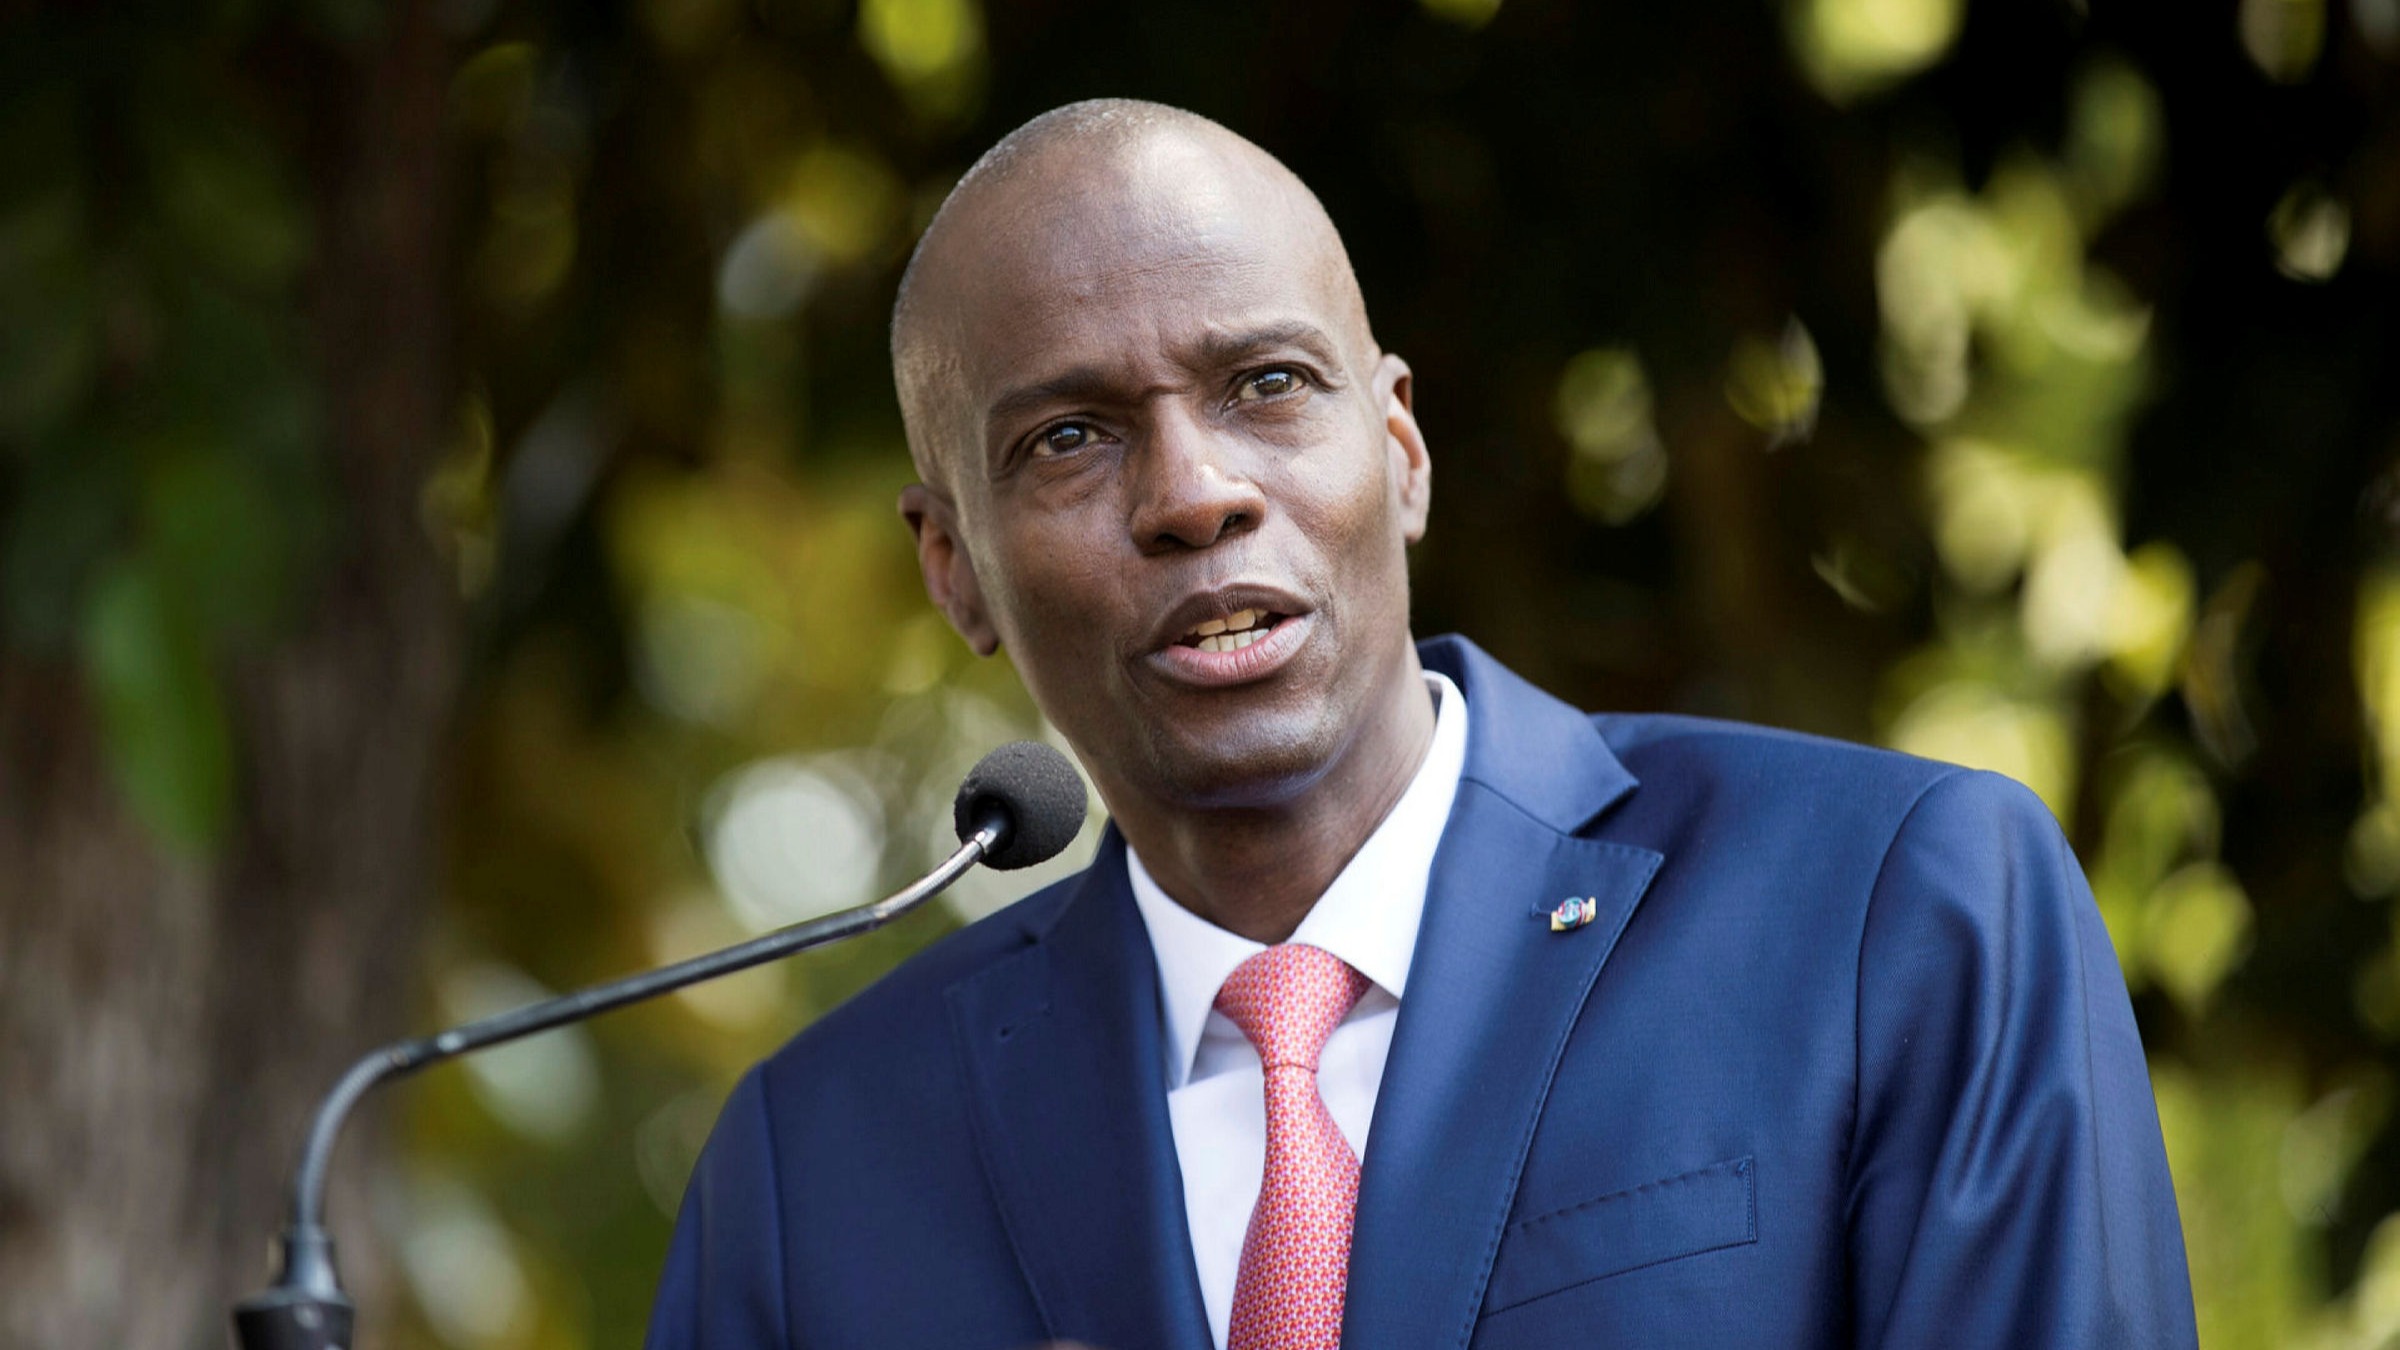 Then-Haitian President Jovenel Moïse was assassinated at his residence in July.